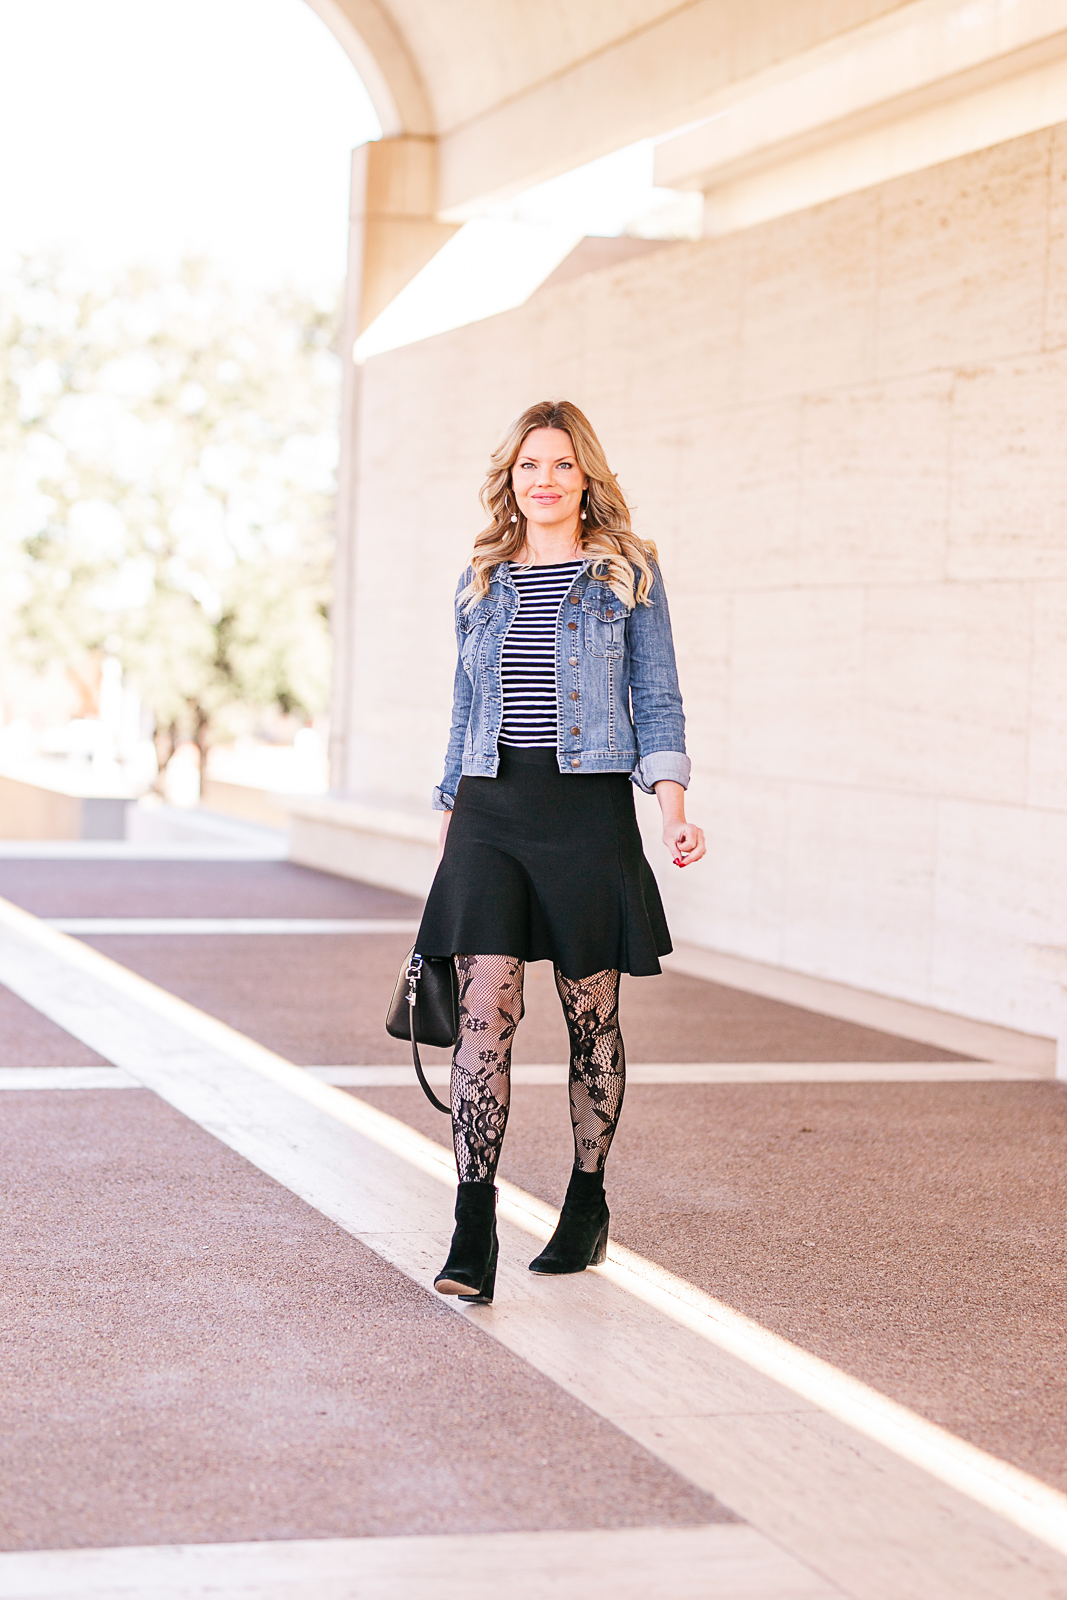 17 Ways How to Wear Patterned Tights and Look Fabulous - Be Modish